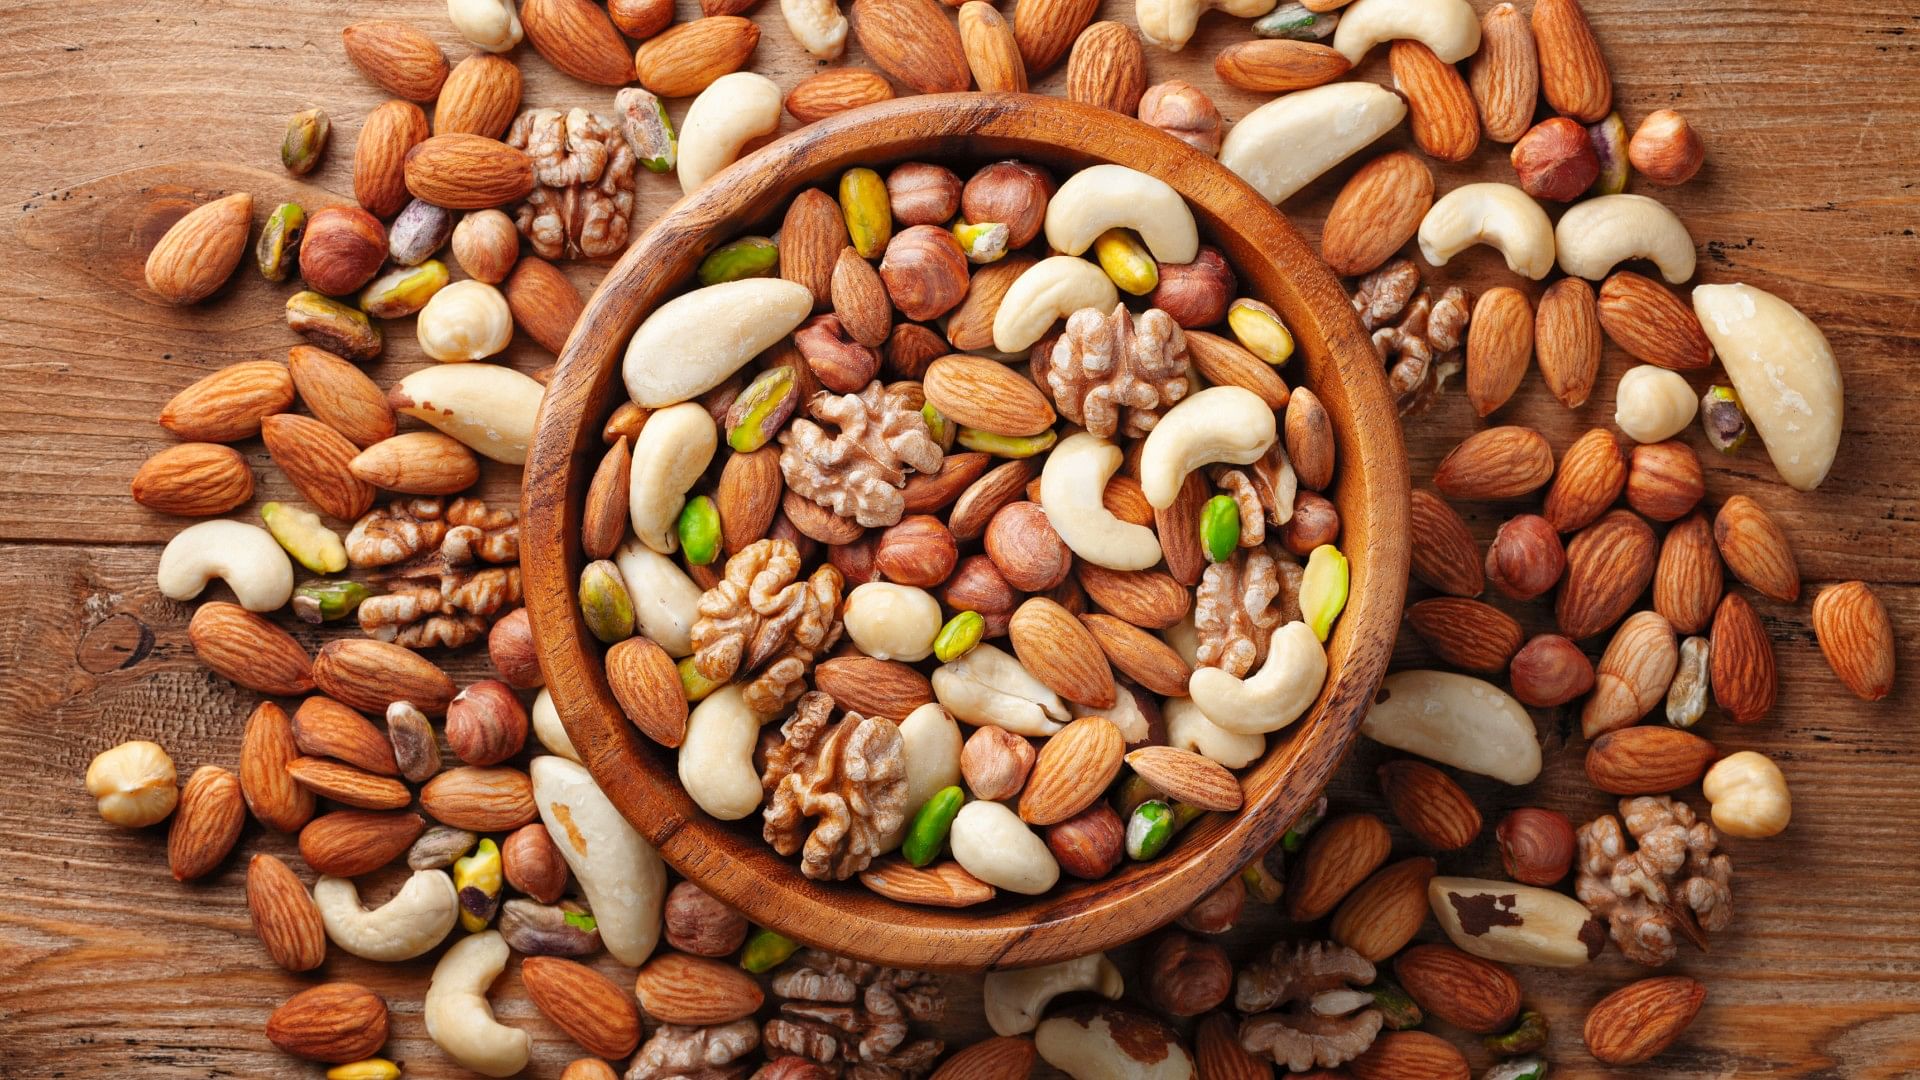 Anti-aging foods: Consume these dry fruits daily to slow down aging